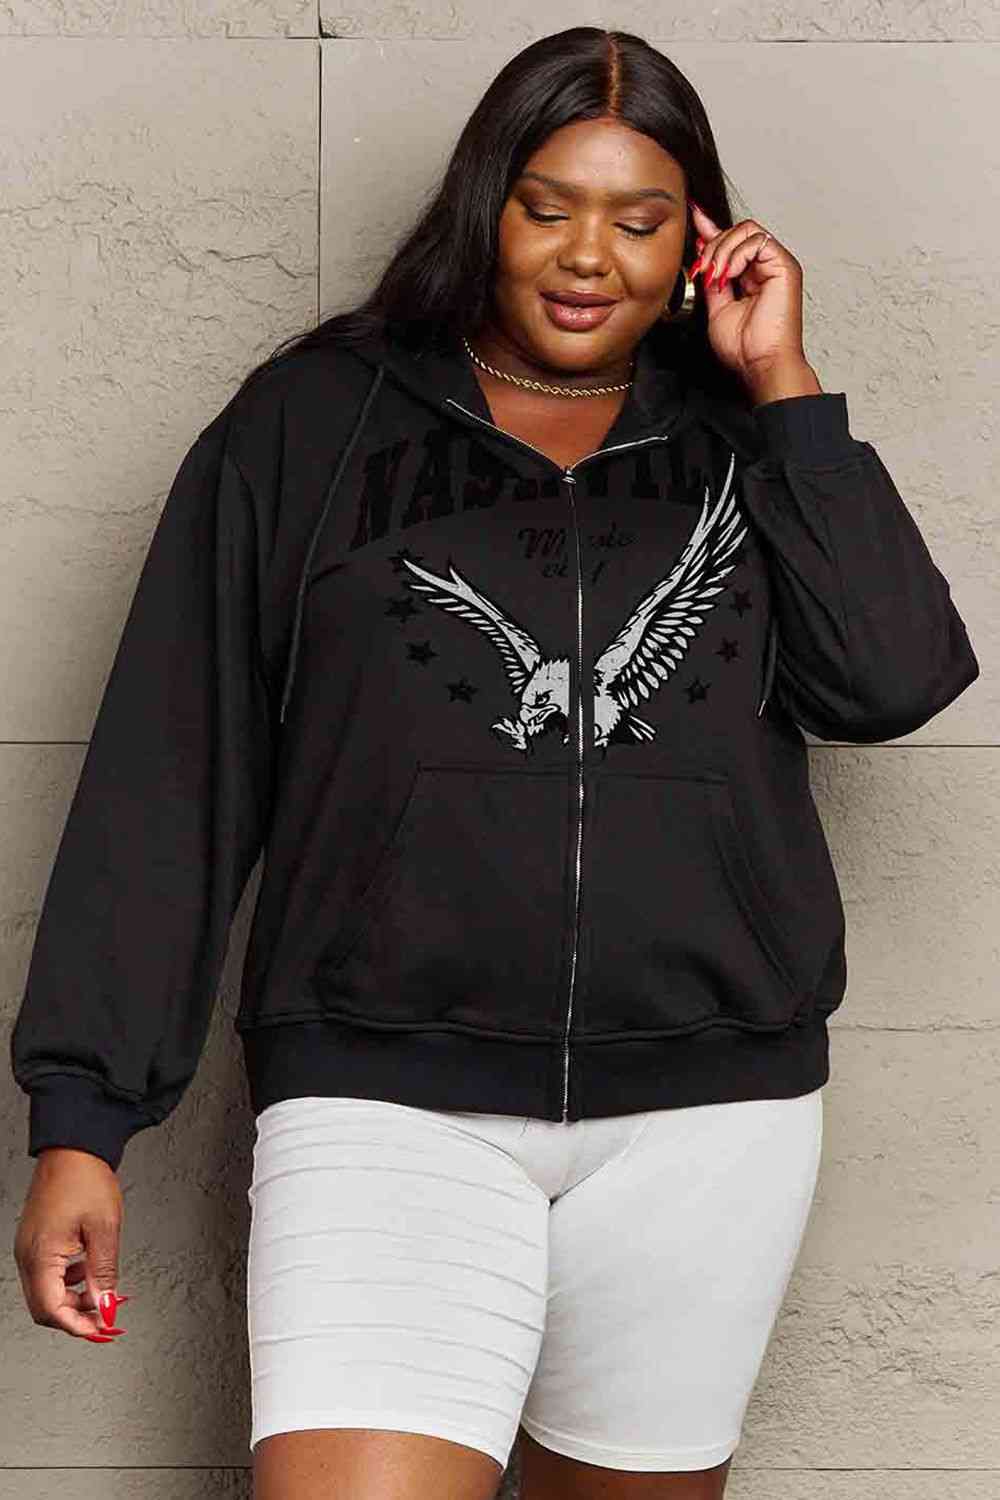 Simply Love Simply Love Full Size NASHVILLE MUSIC CITY Graphic Hoodie